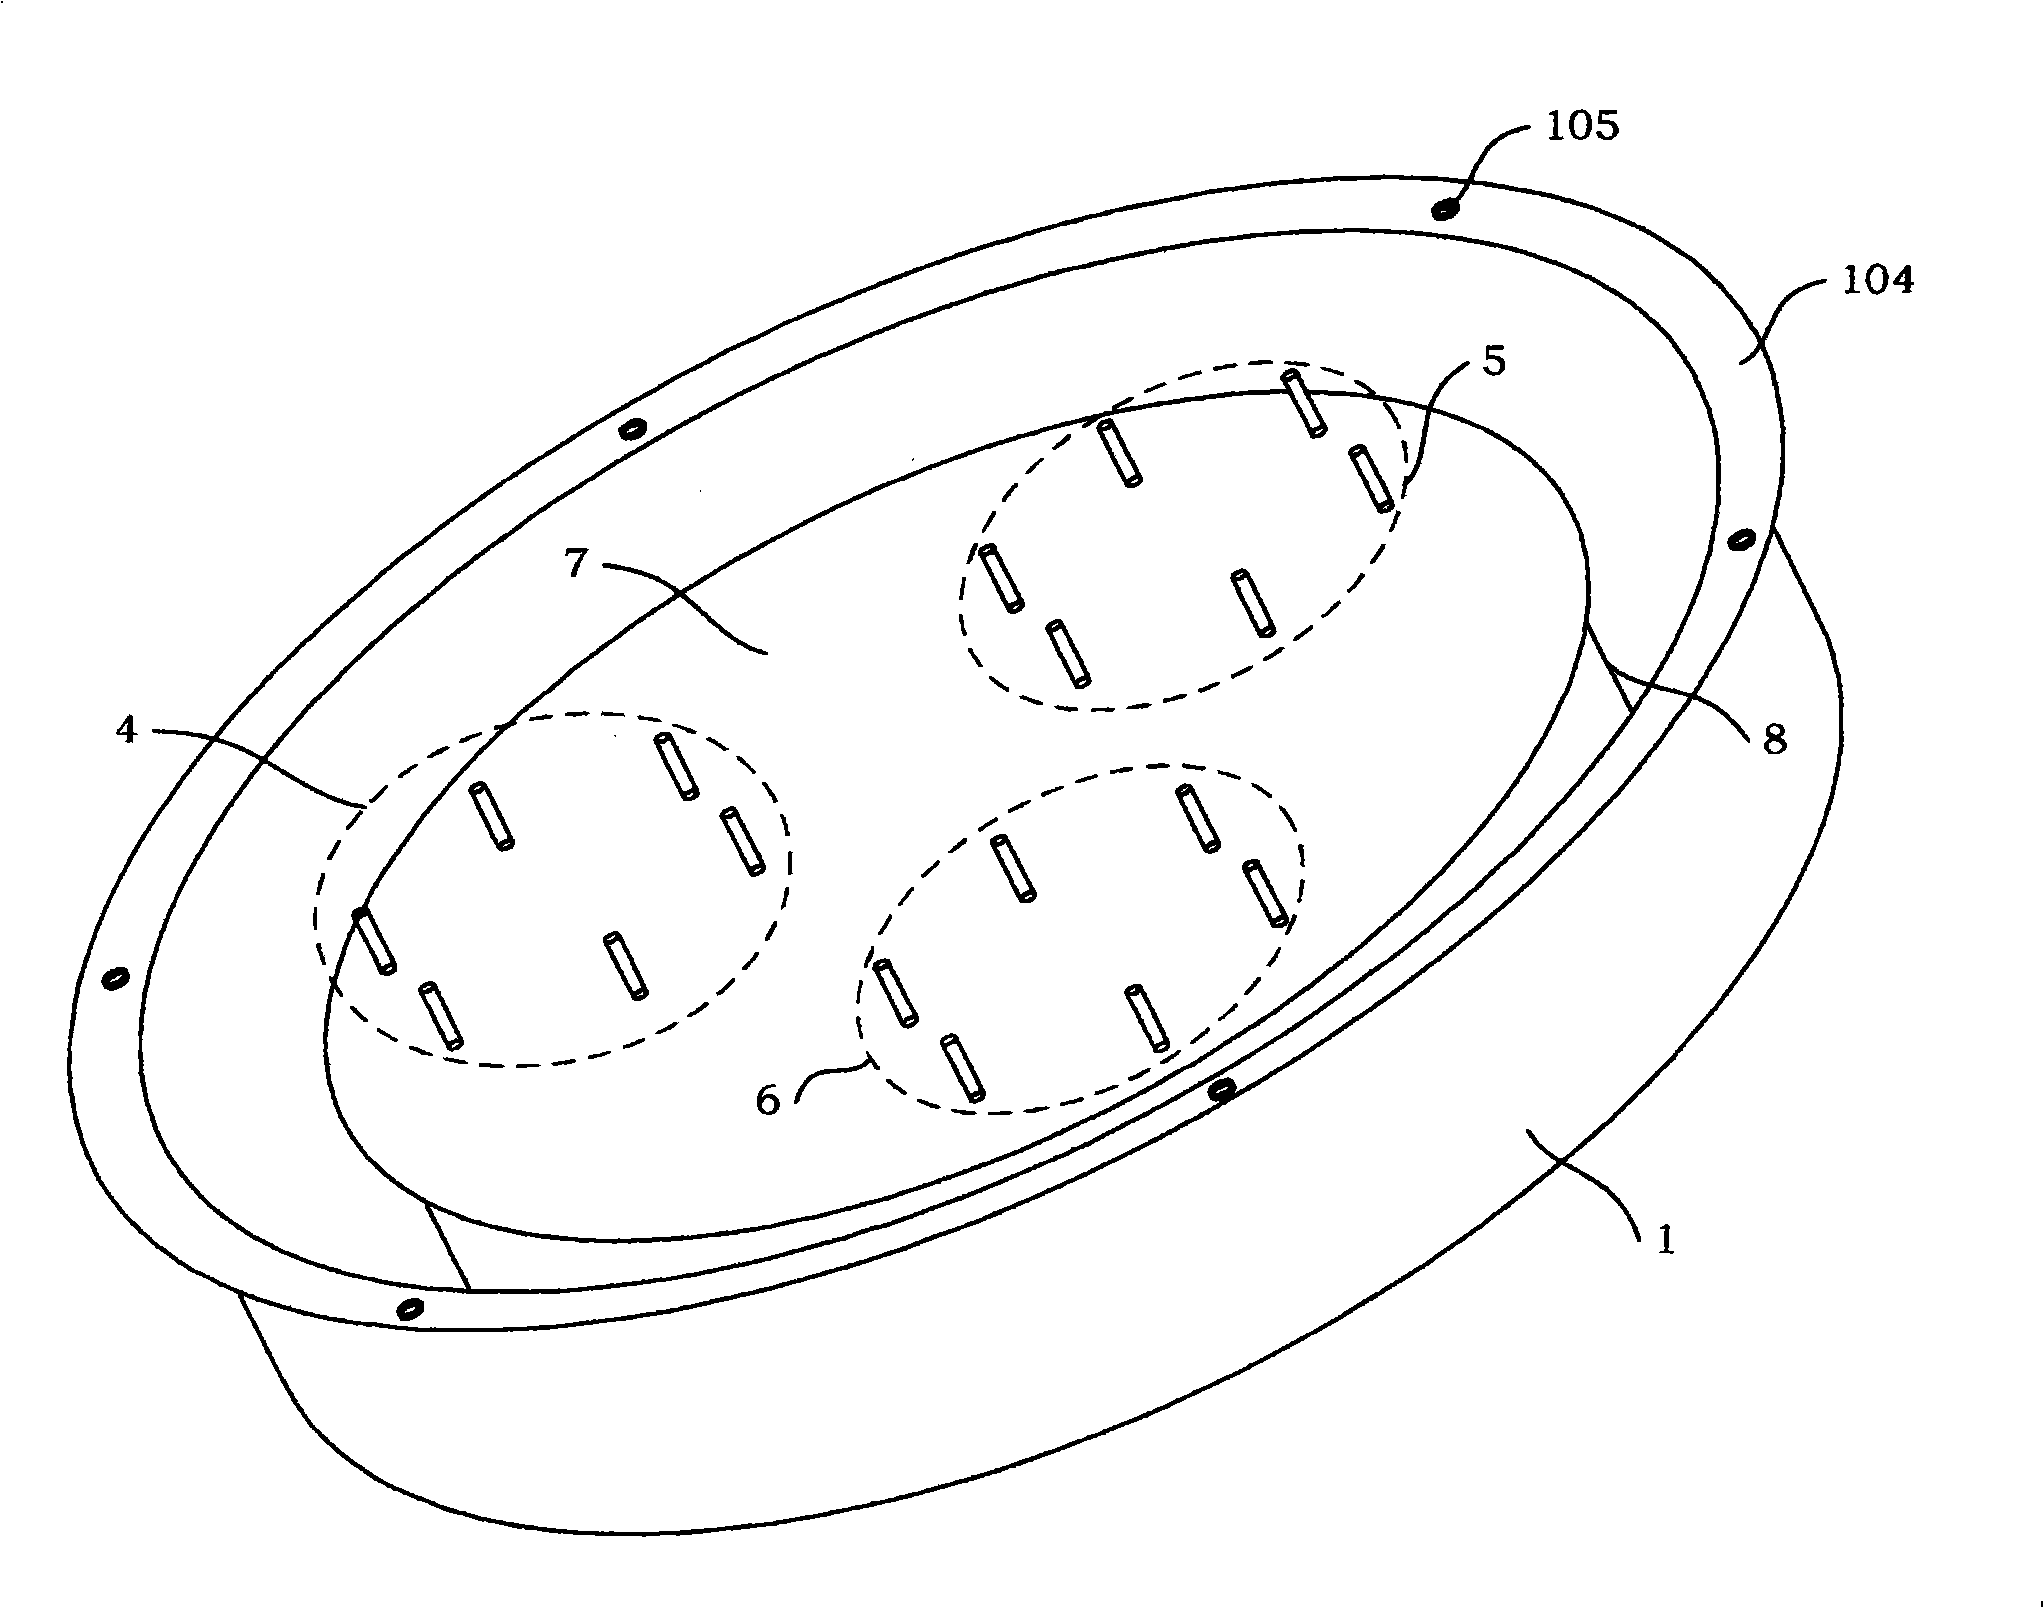 Omnidirectional wideband antenna with conformal structure of installing surface